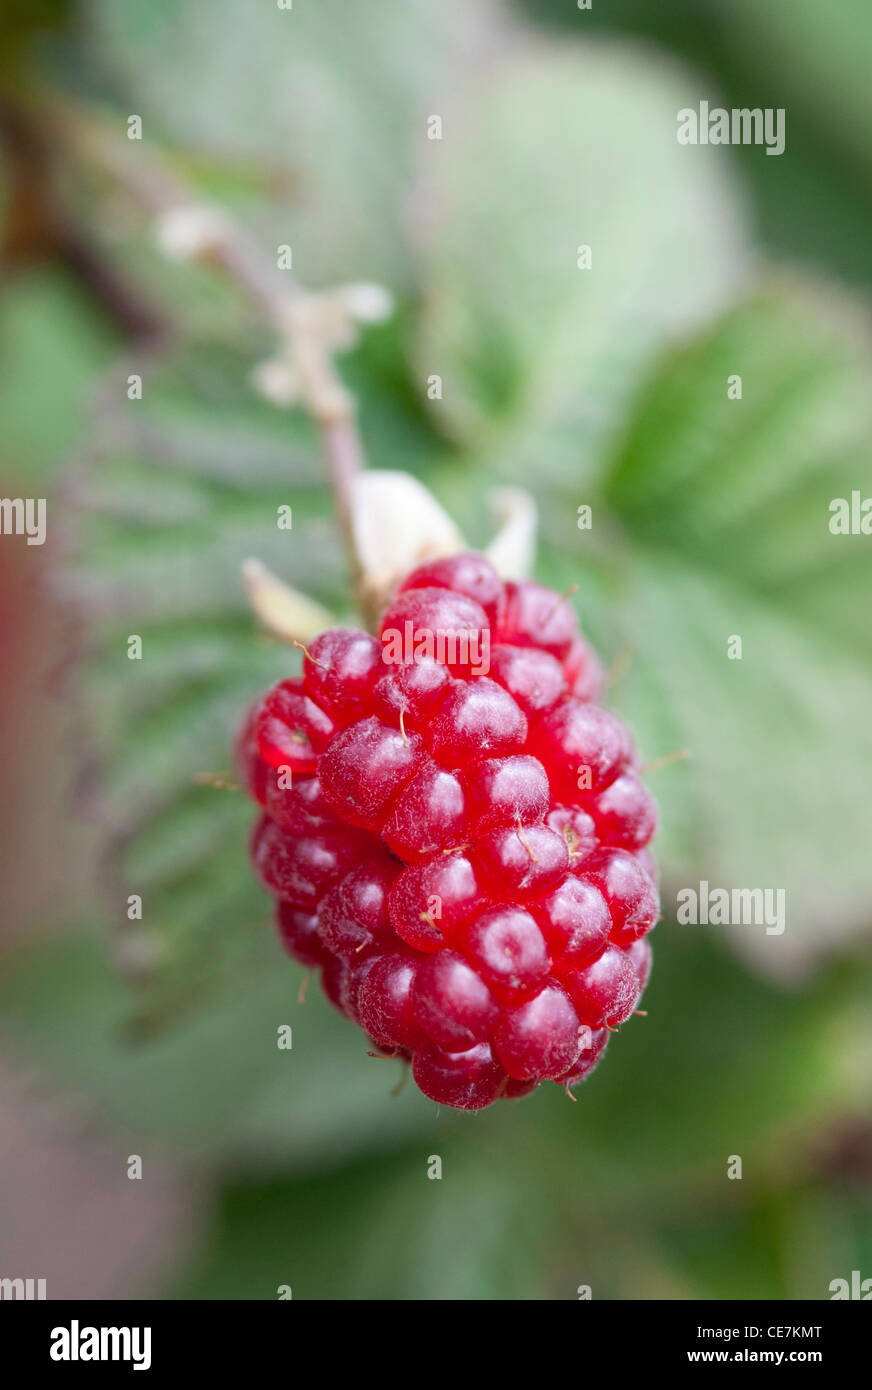 Single ripe red fruit of the hybrid berry Rubus 'Tummelberry' growing on the plant. Stock Photo